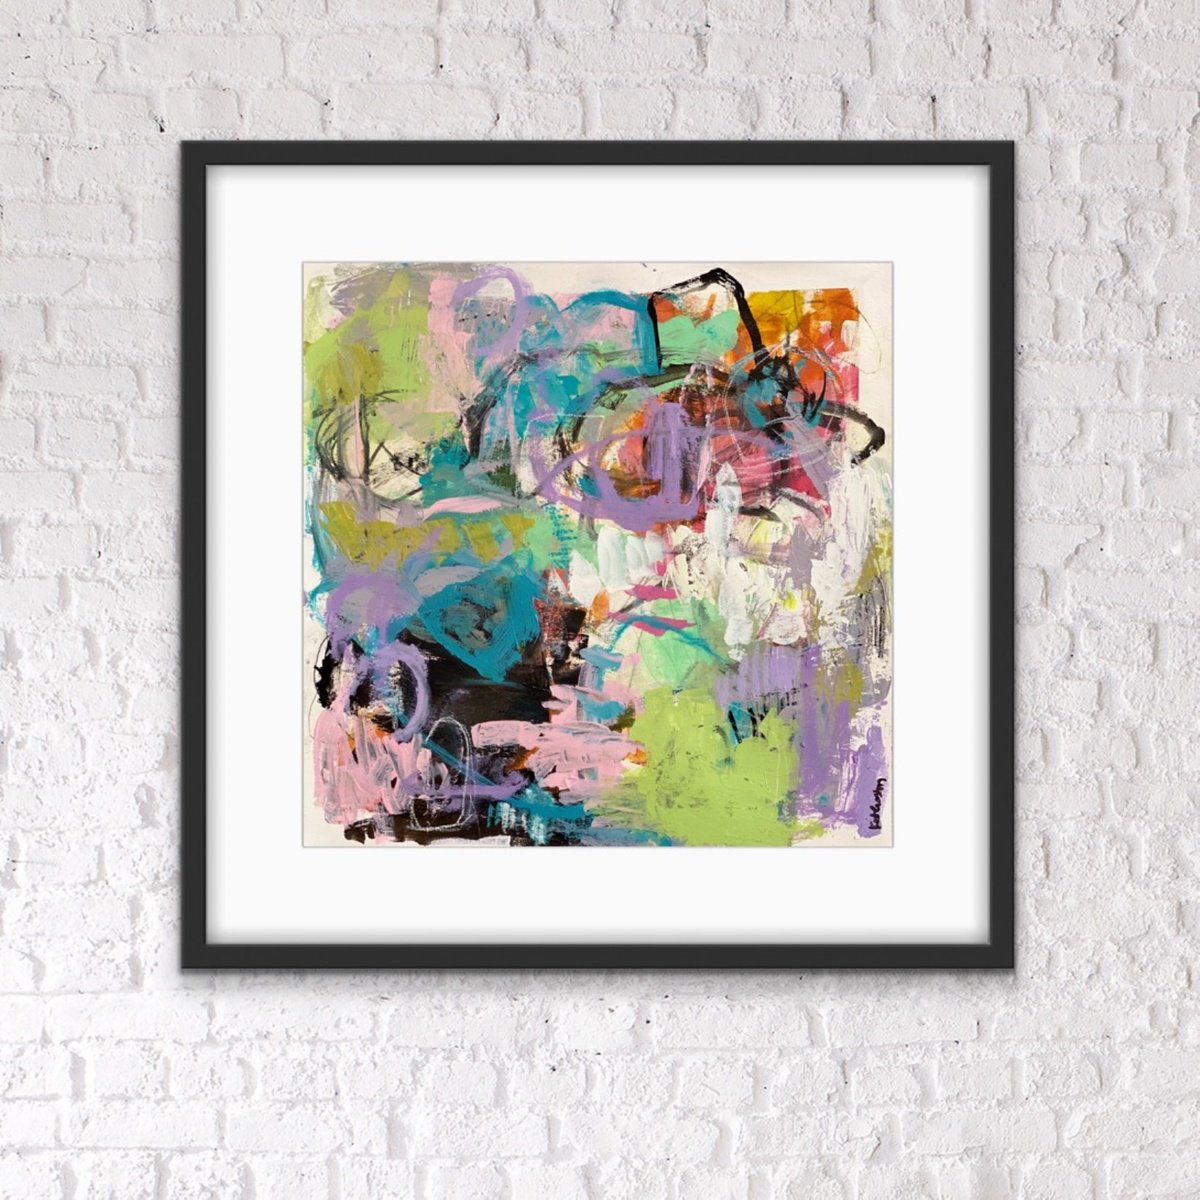 I’ve Got a Stain on My Shirt - playful colorful whimsical abstract raw art by Kat Crosby